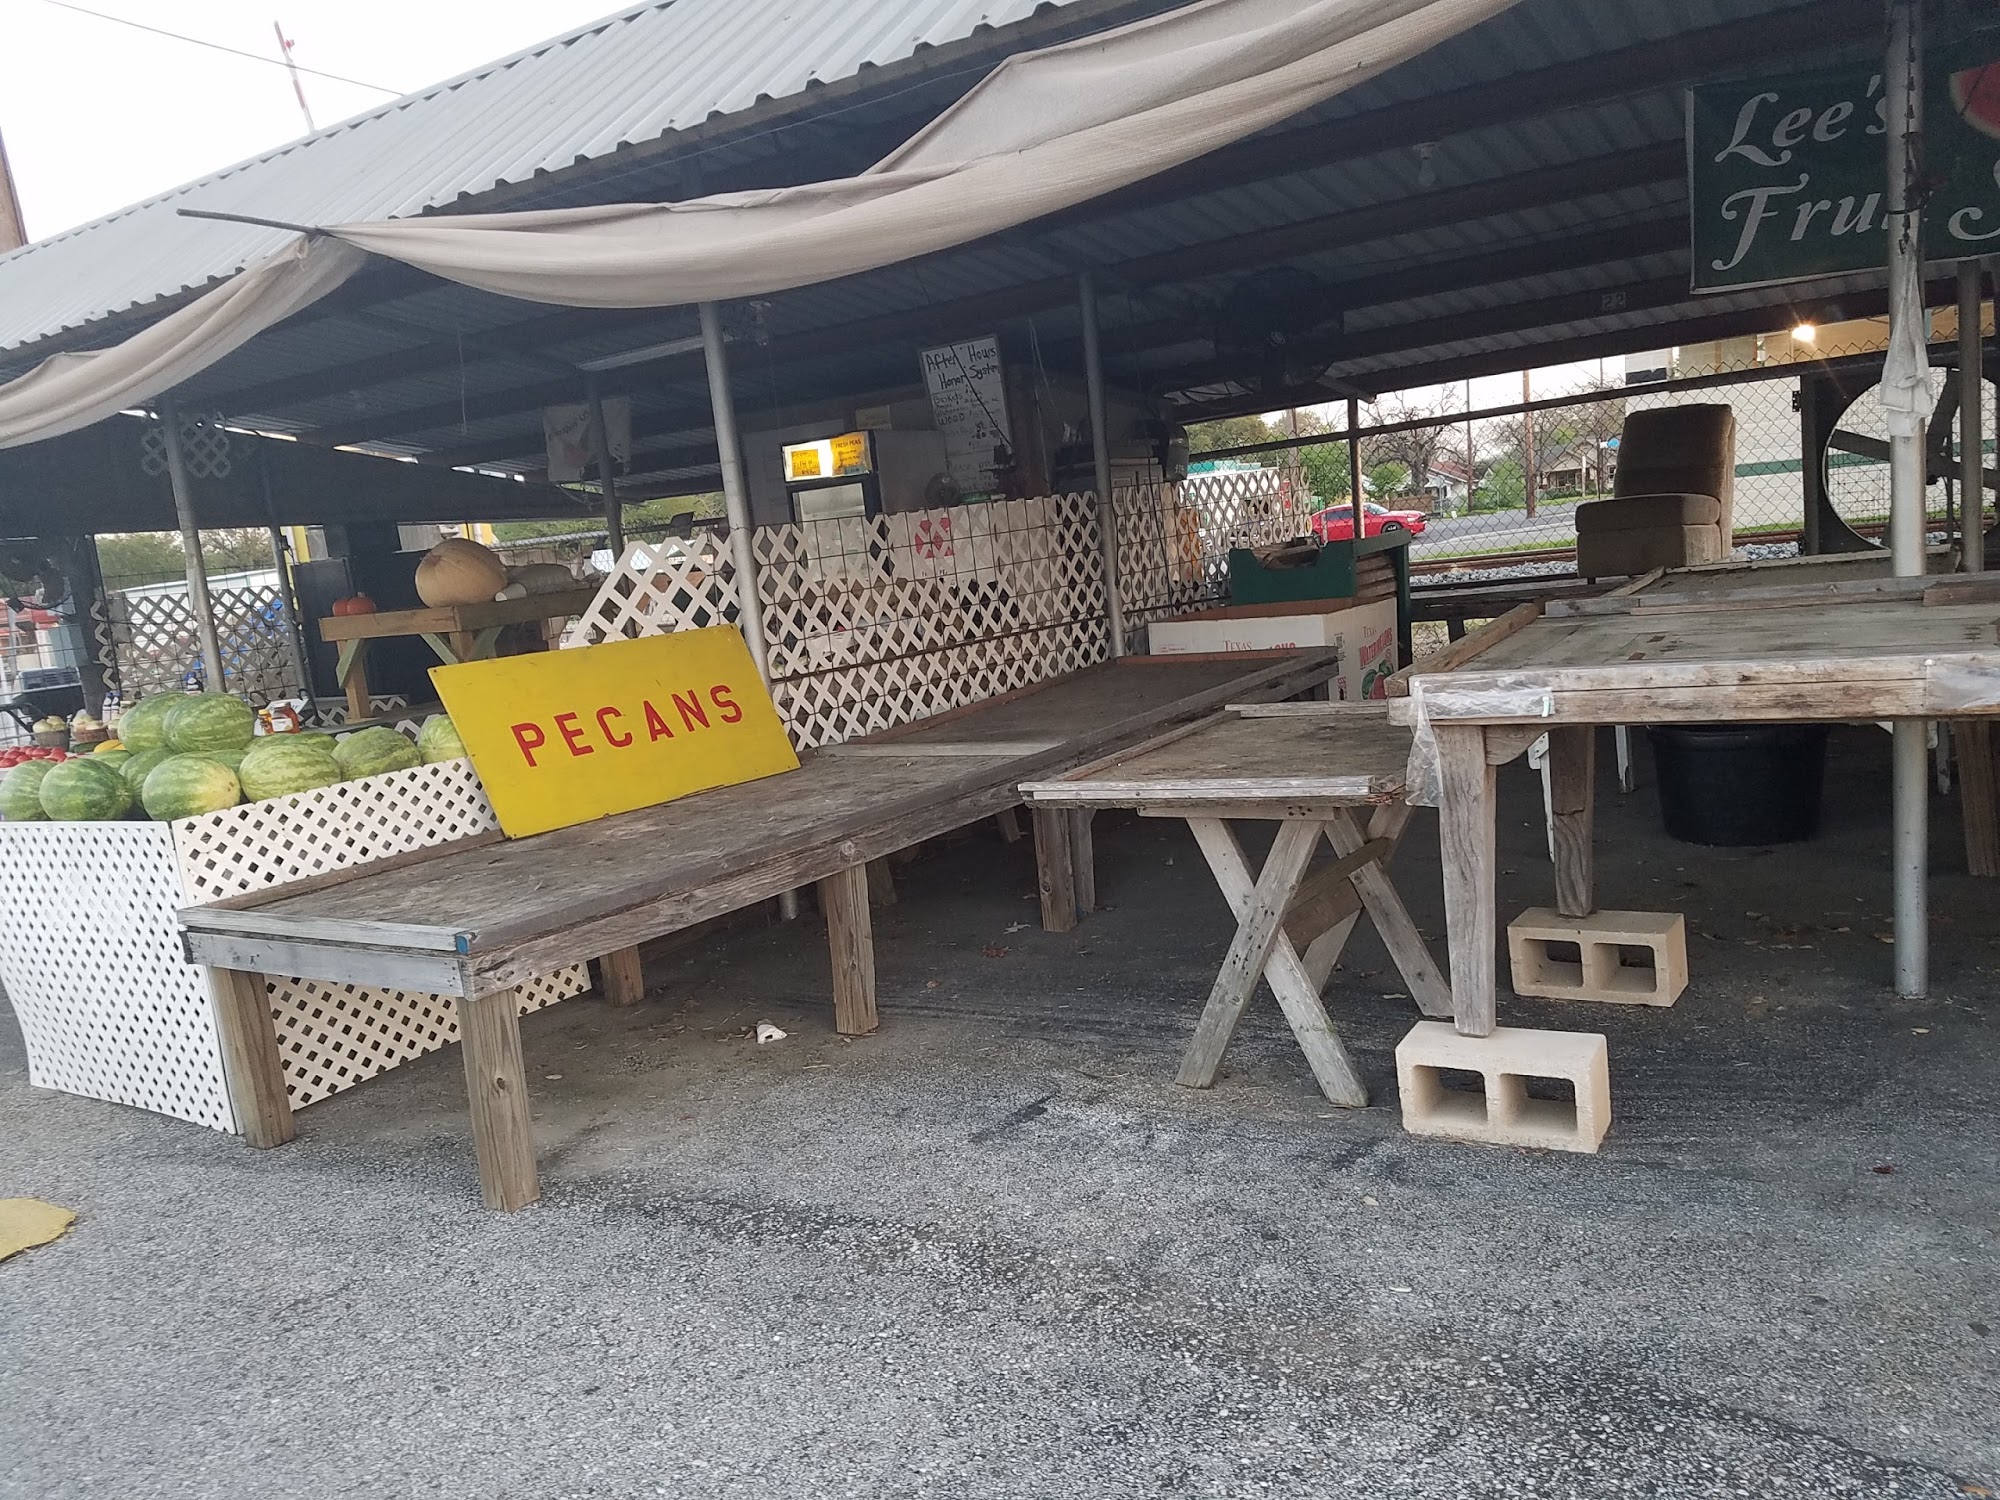 Lee's Fruit Stand